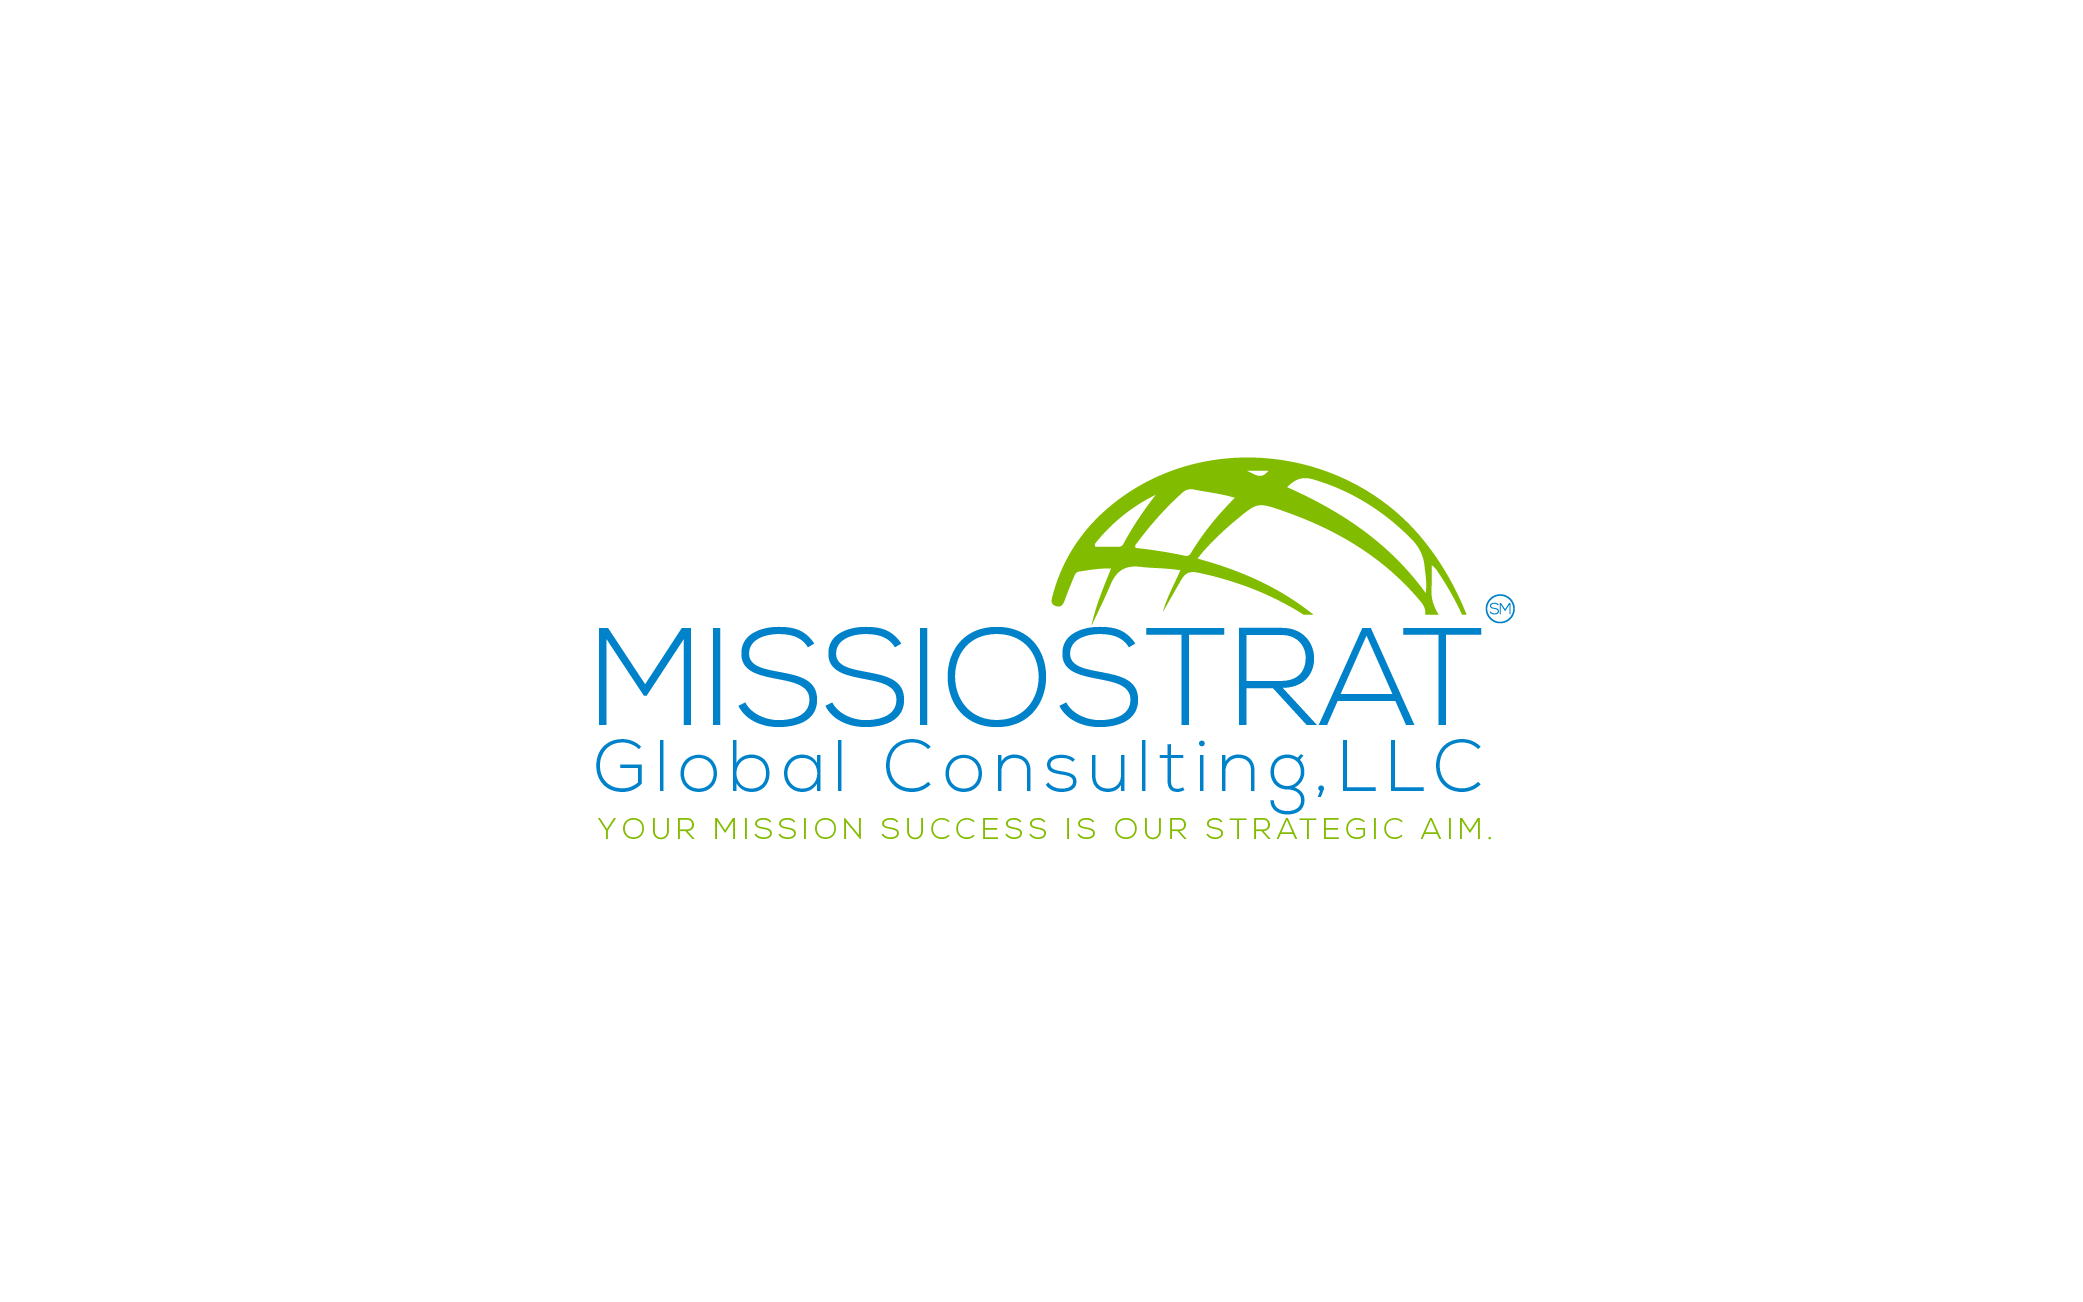 MissioStrat Global Consulting, LLC